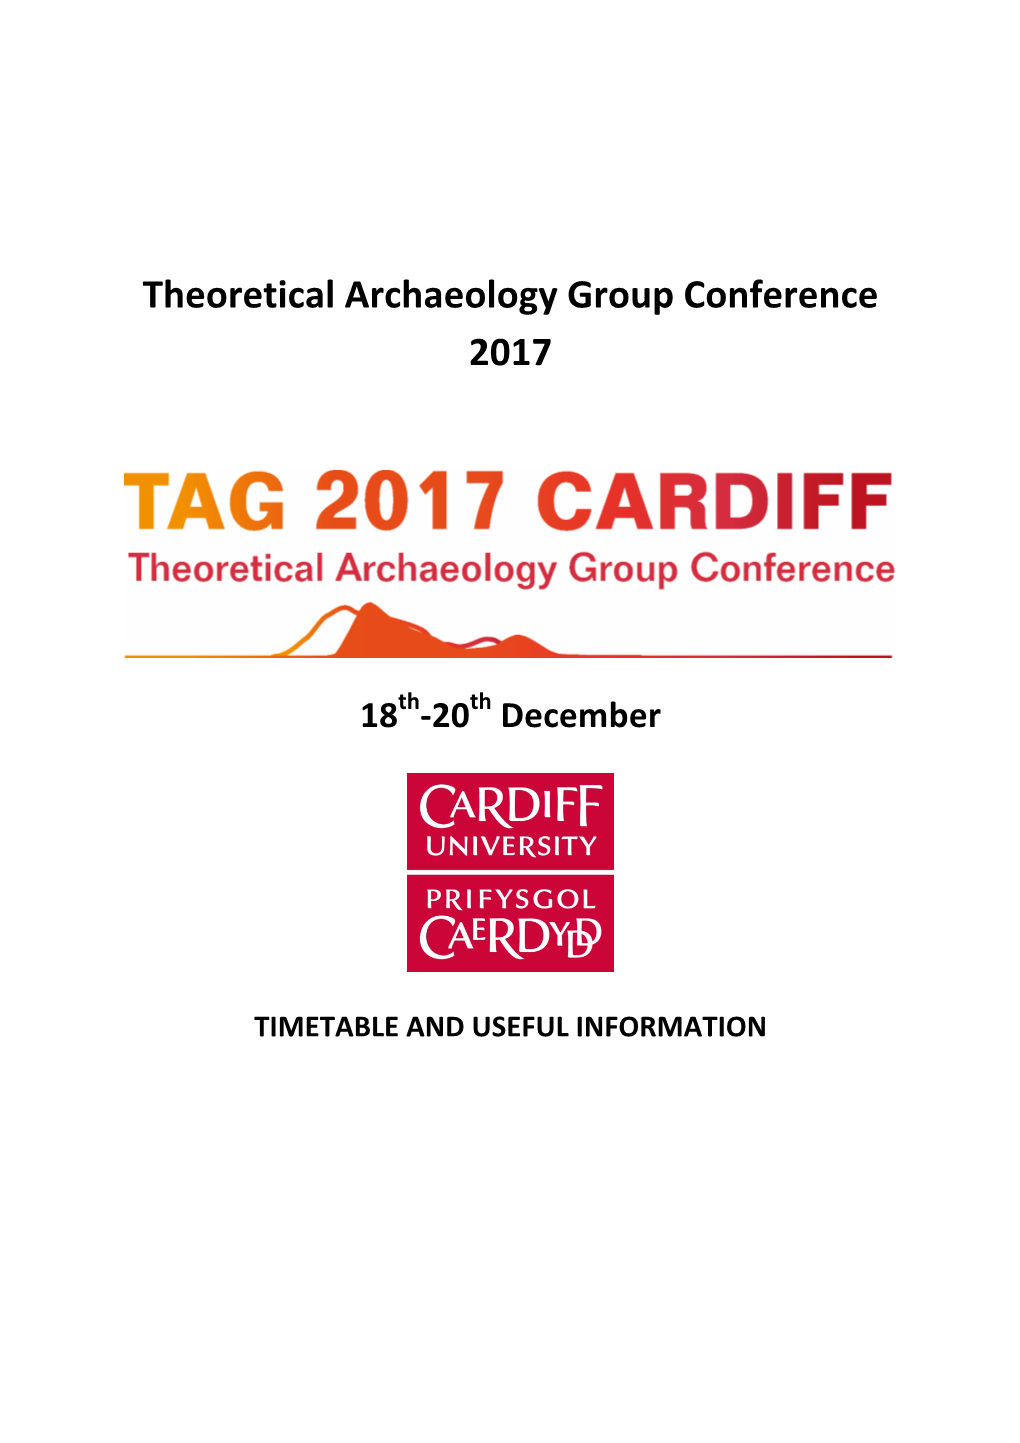 Theoretical Archaeology Group Conference 2017